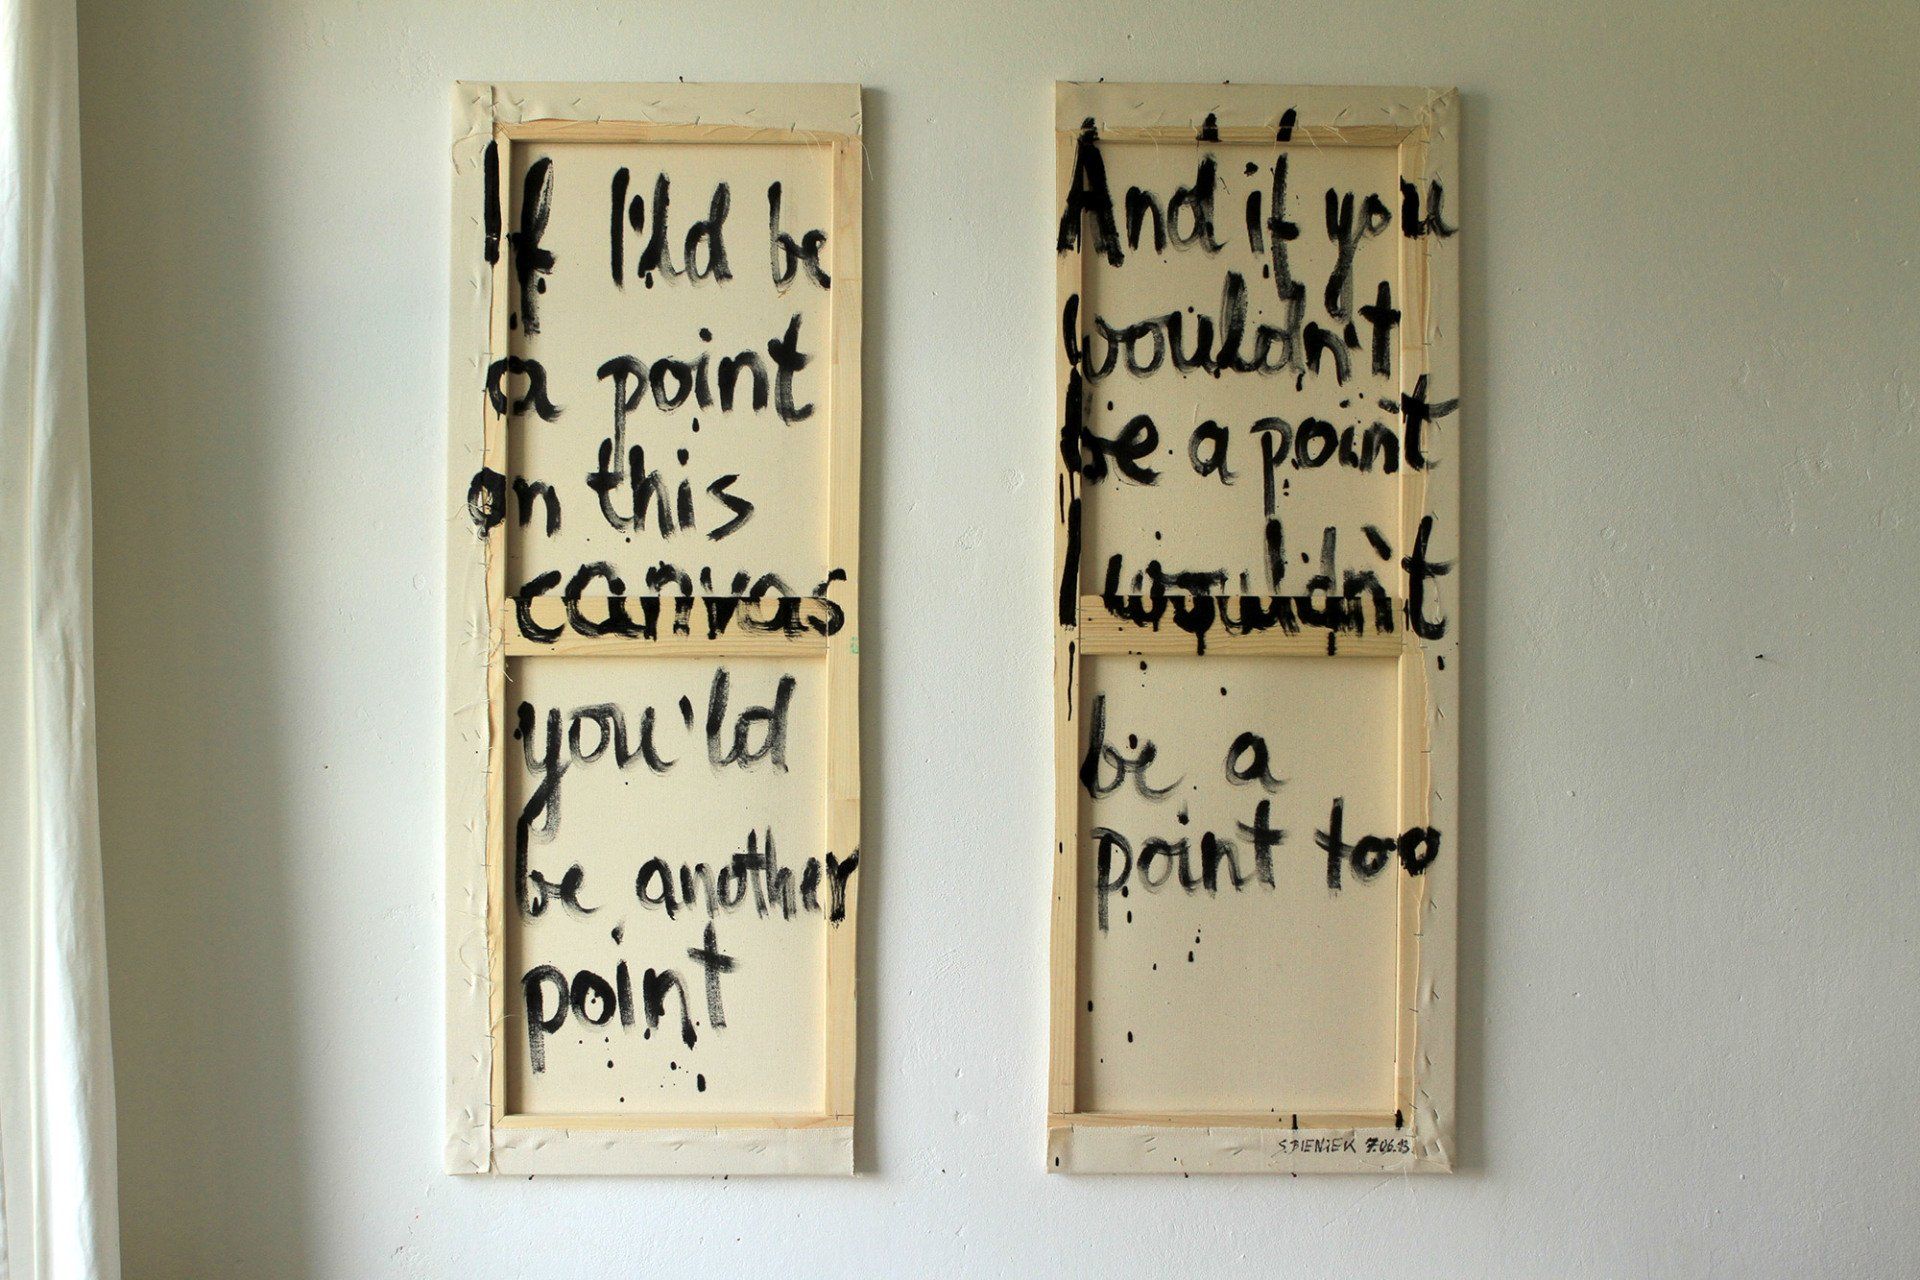 The Metaphor of the Metaphor If I'ld be a point on this canvas you'ld be another point. And if you wouldn't be a point, I wouldn't be a point too  texart Bieniek-Text by Sebastian Bieniek